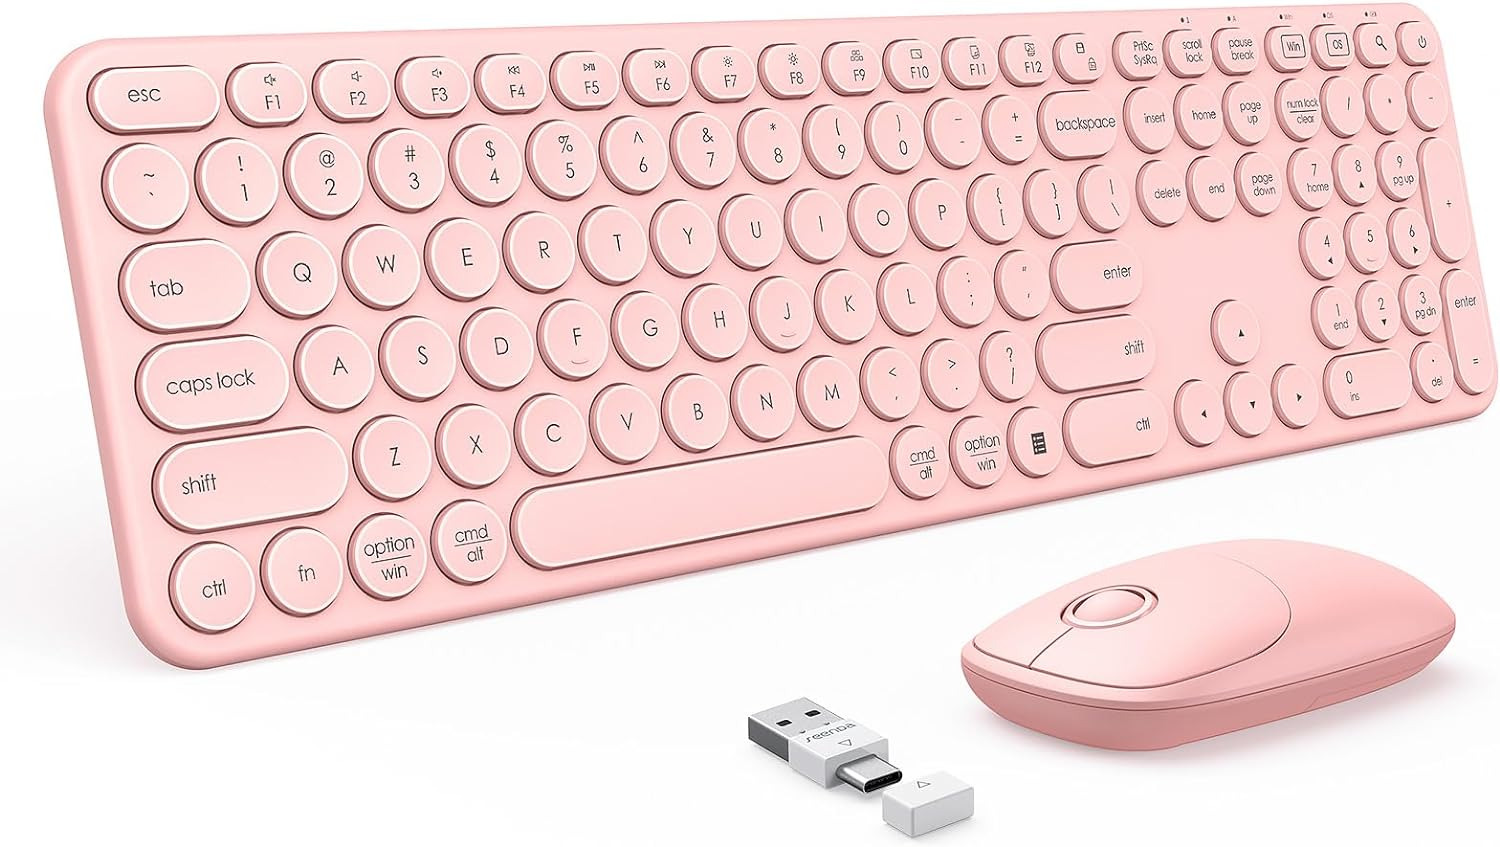 Wireless Keyboard and Mouse Combo, Cute Pink Keyboard & Mouse with USB Receiver 